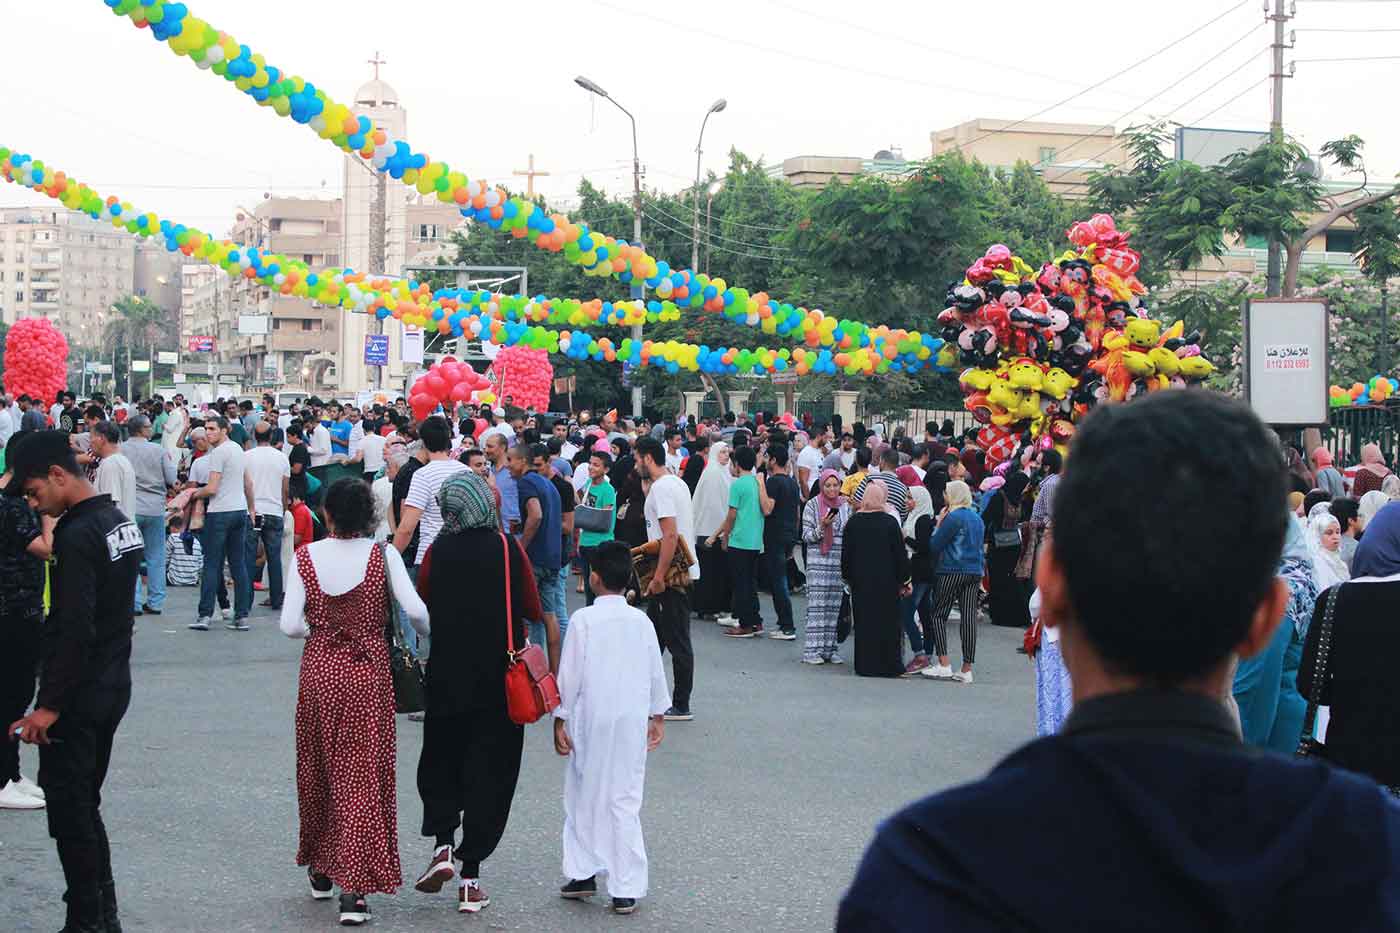 Crowded festival in streets of Cairo